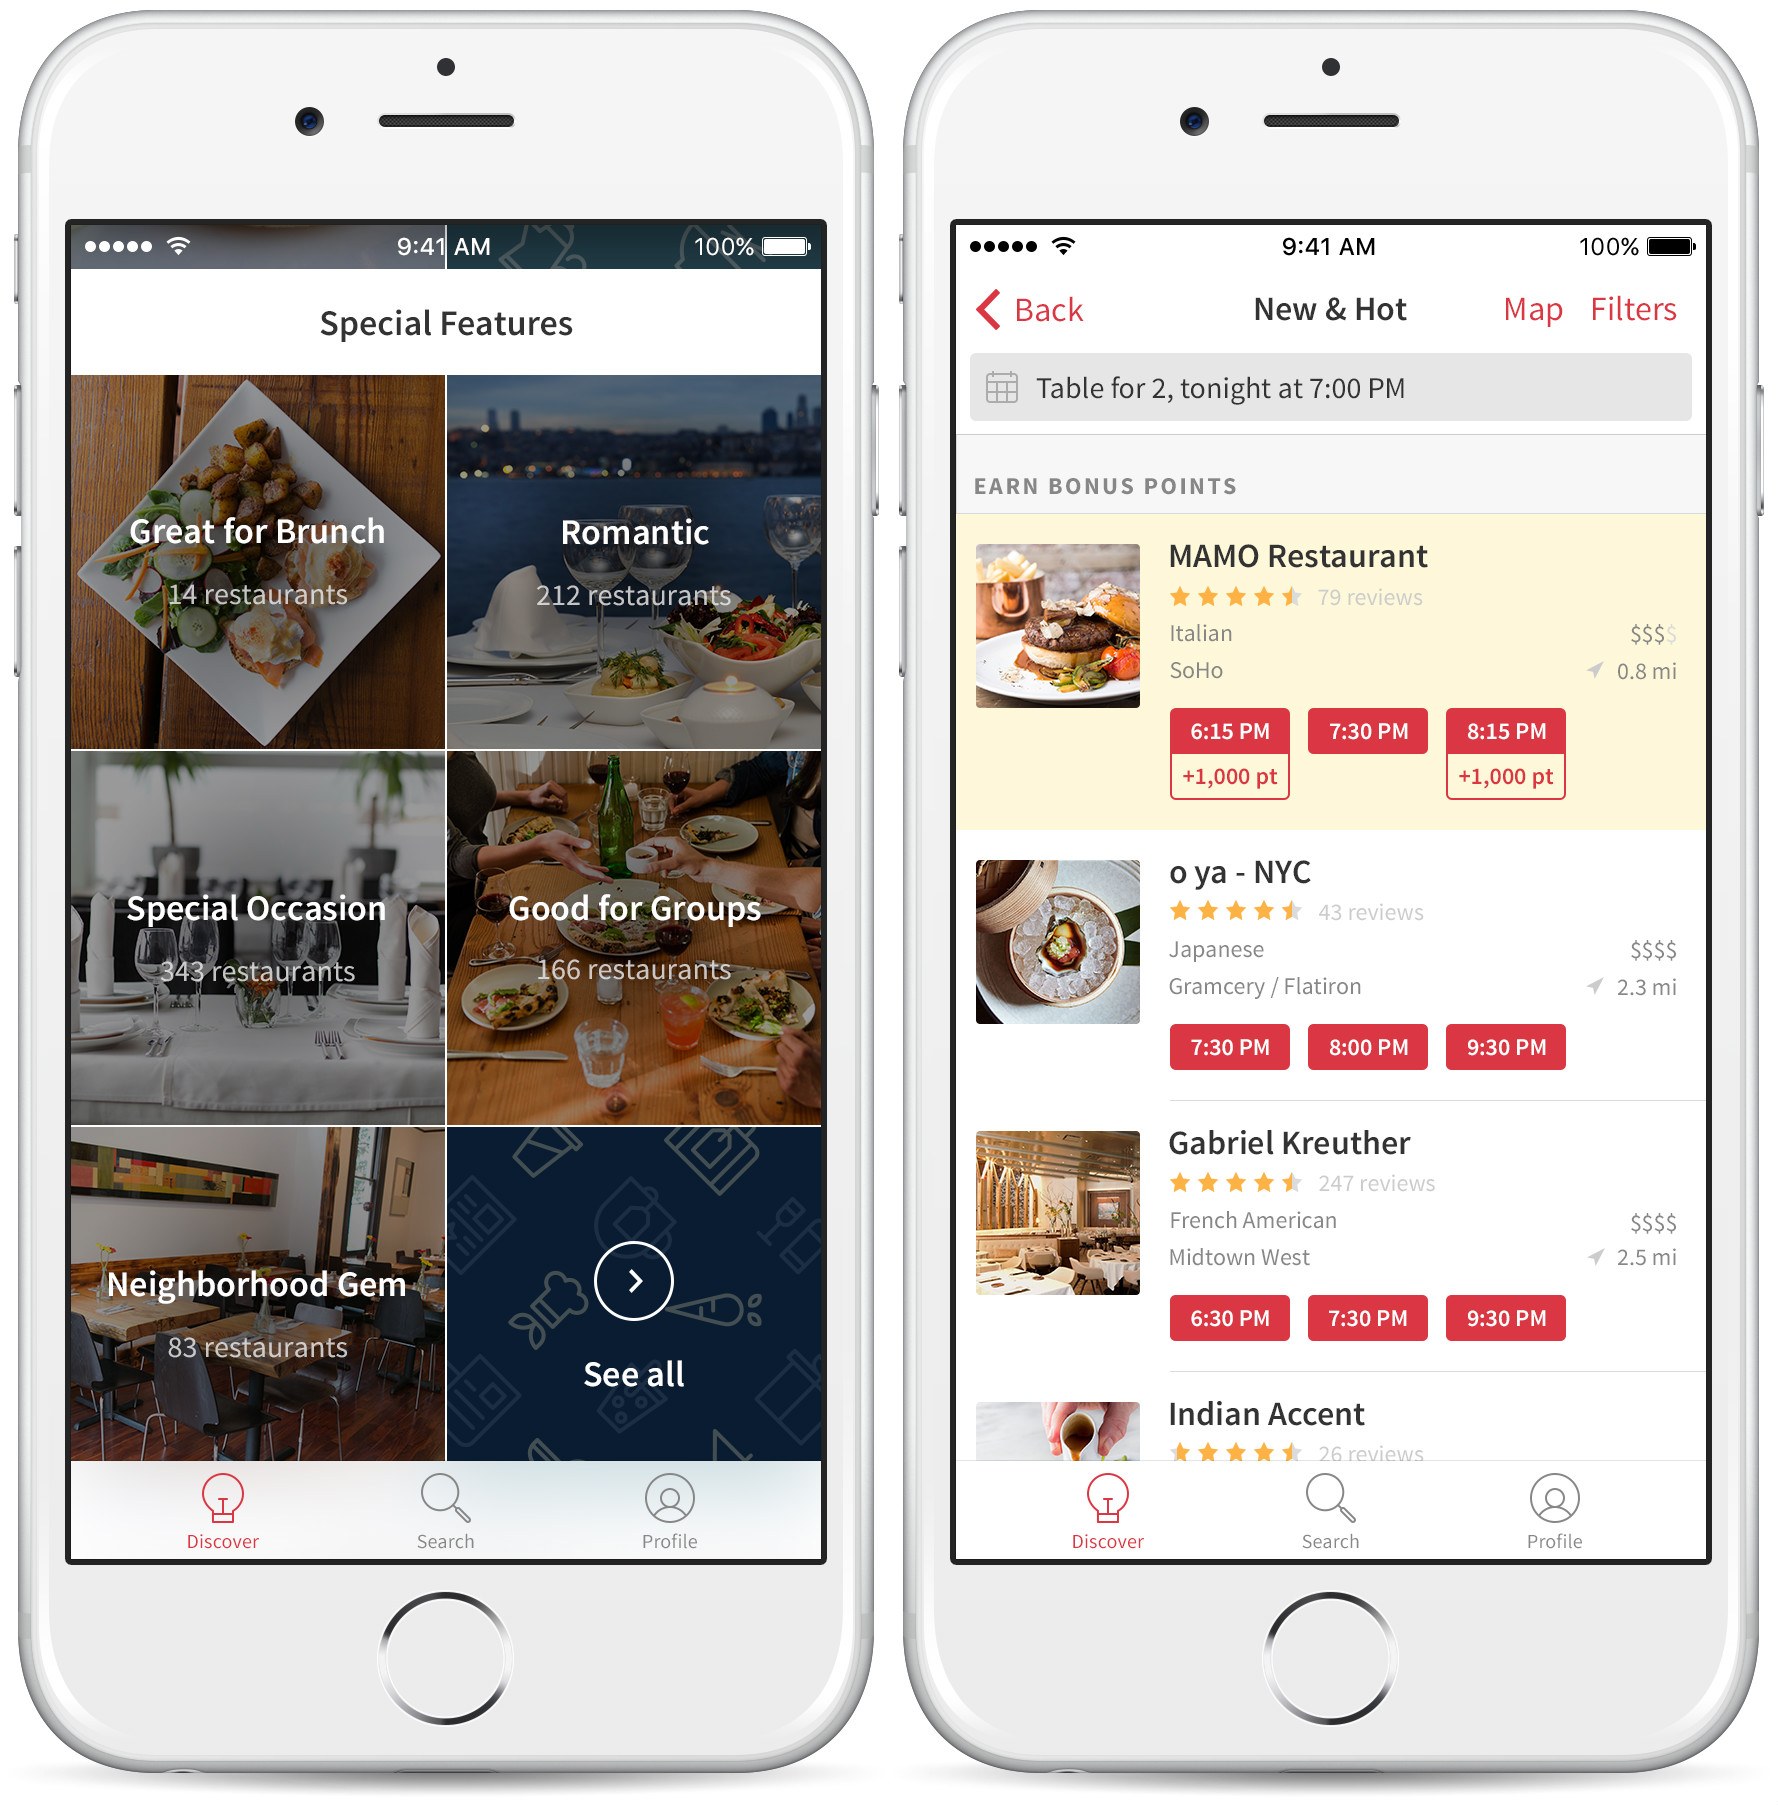 ReviewTrackers and OpenTable Partner to Help Restaurants Centrally Manage  Reviews - ReviewTrackers